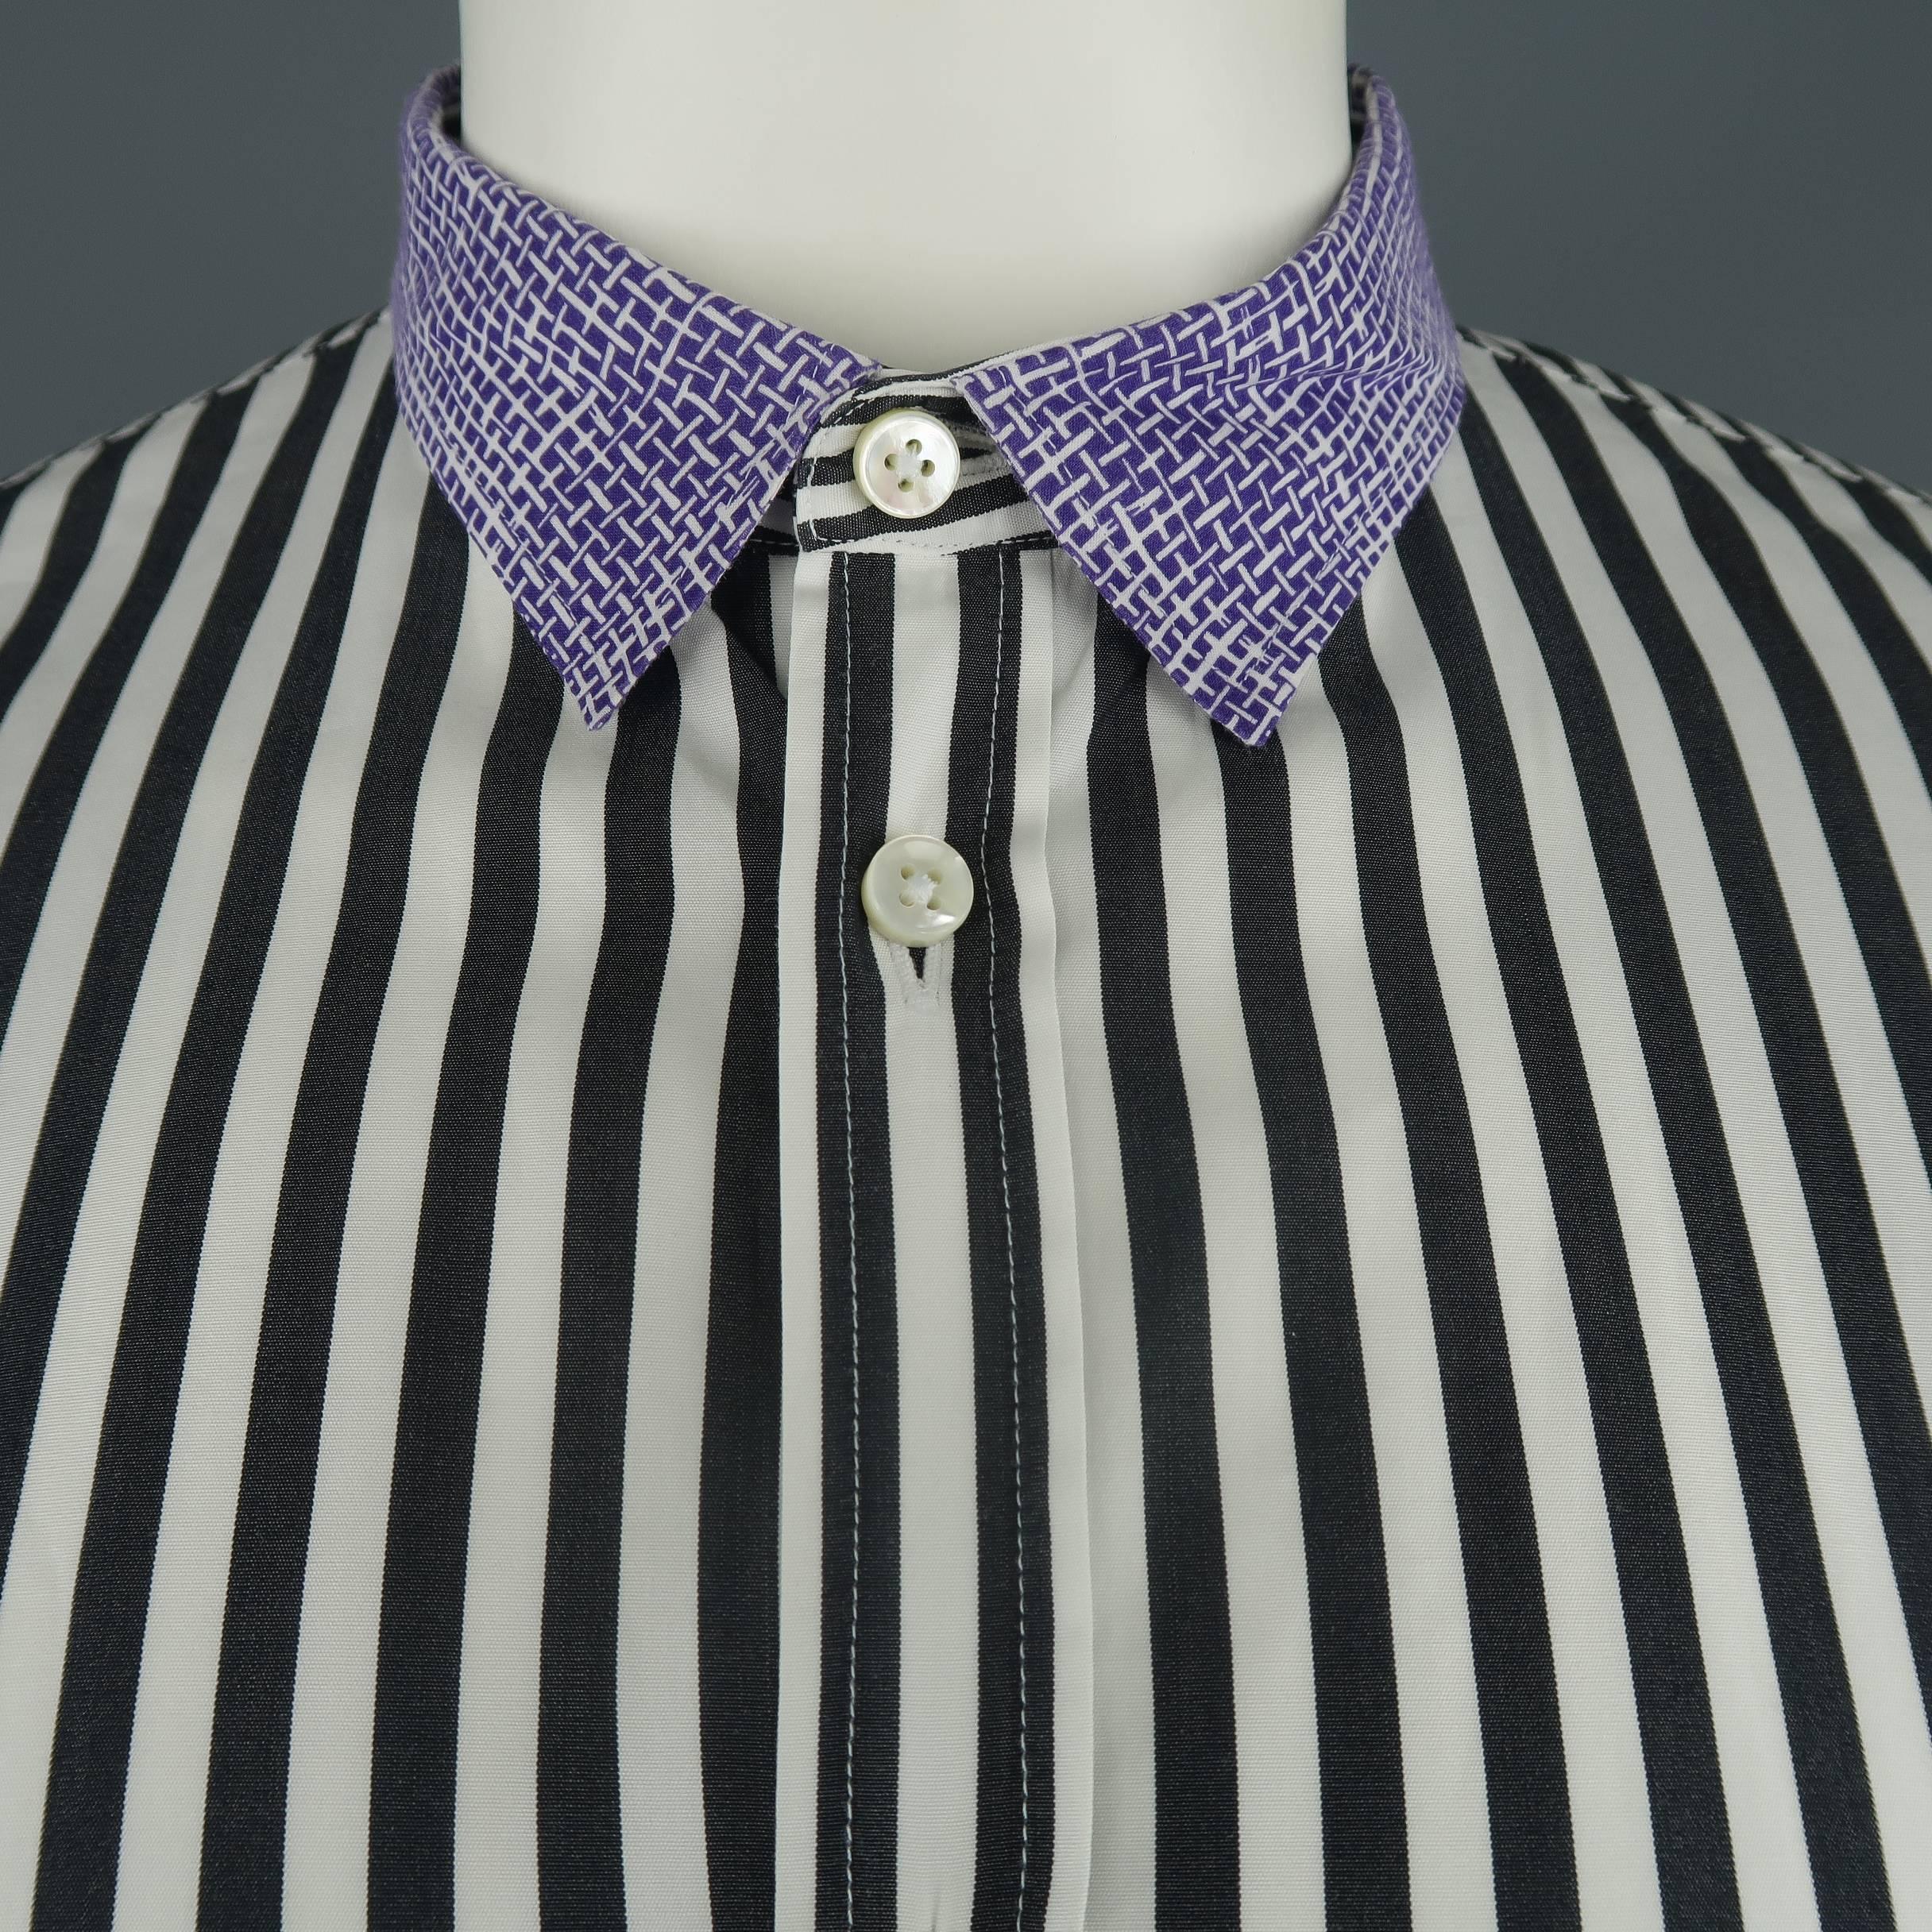 BOTTEGA VENETA shirt comes in black and white striped cotton with purple woven print contrast collar and cuffs. Made in Italy.
 
Excellent Pre-Owned Condition.
Marked: IT 52
 
Measurements:
 
Shoulder: 18 in.
Chest: 46 in.
Sleeve: 27.5 in.
Length: